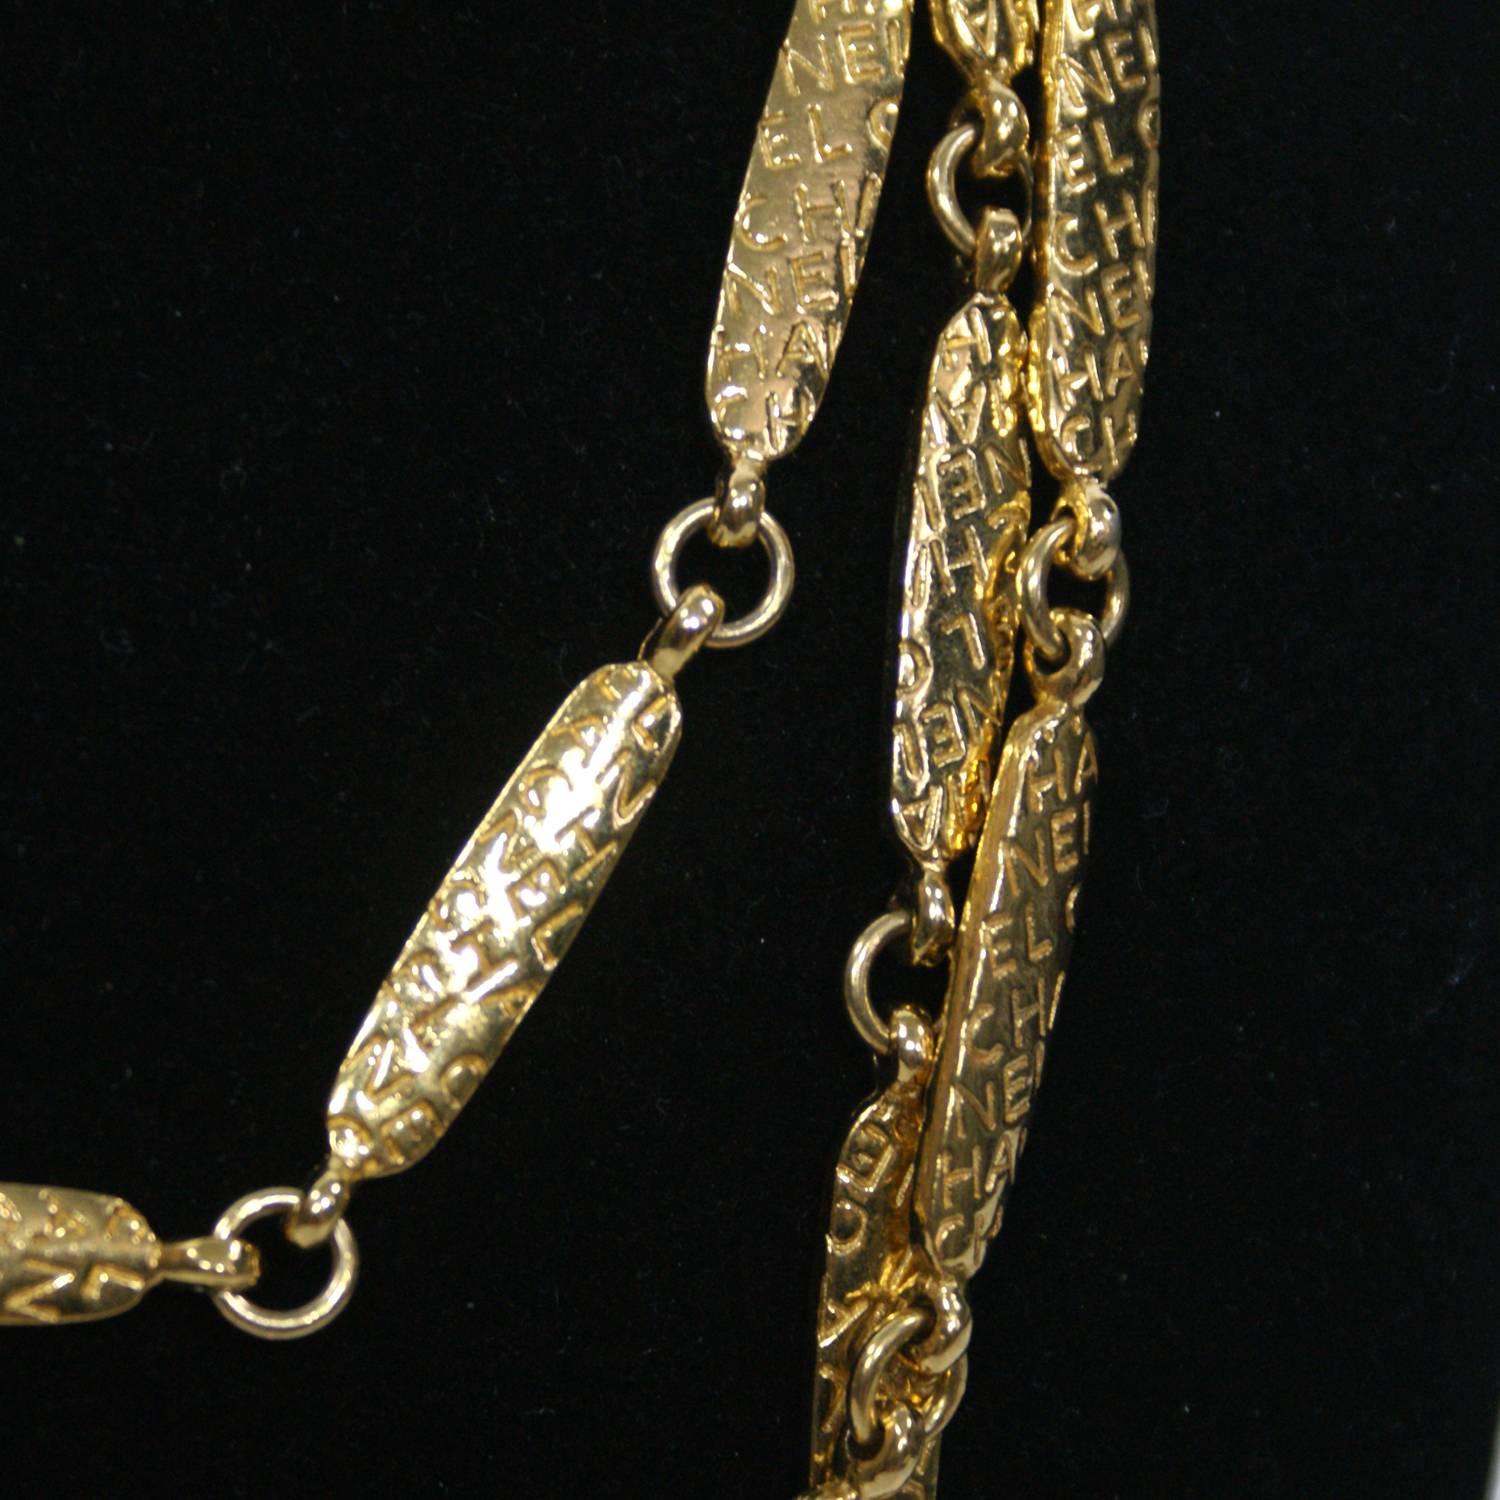 Vintage logo stamped chain link necklace

Total length: 35"

Minor wear consistent with age.